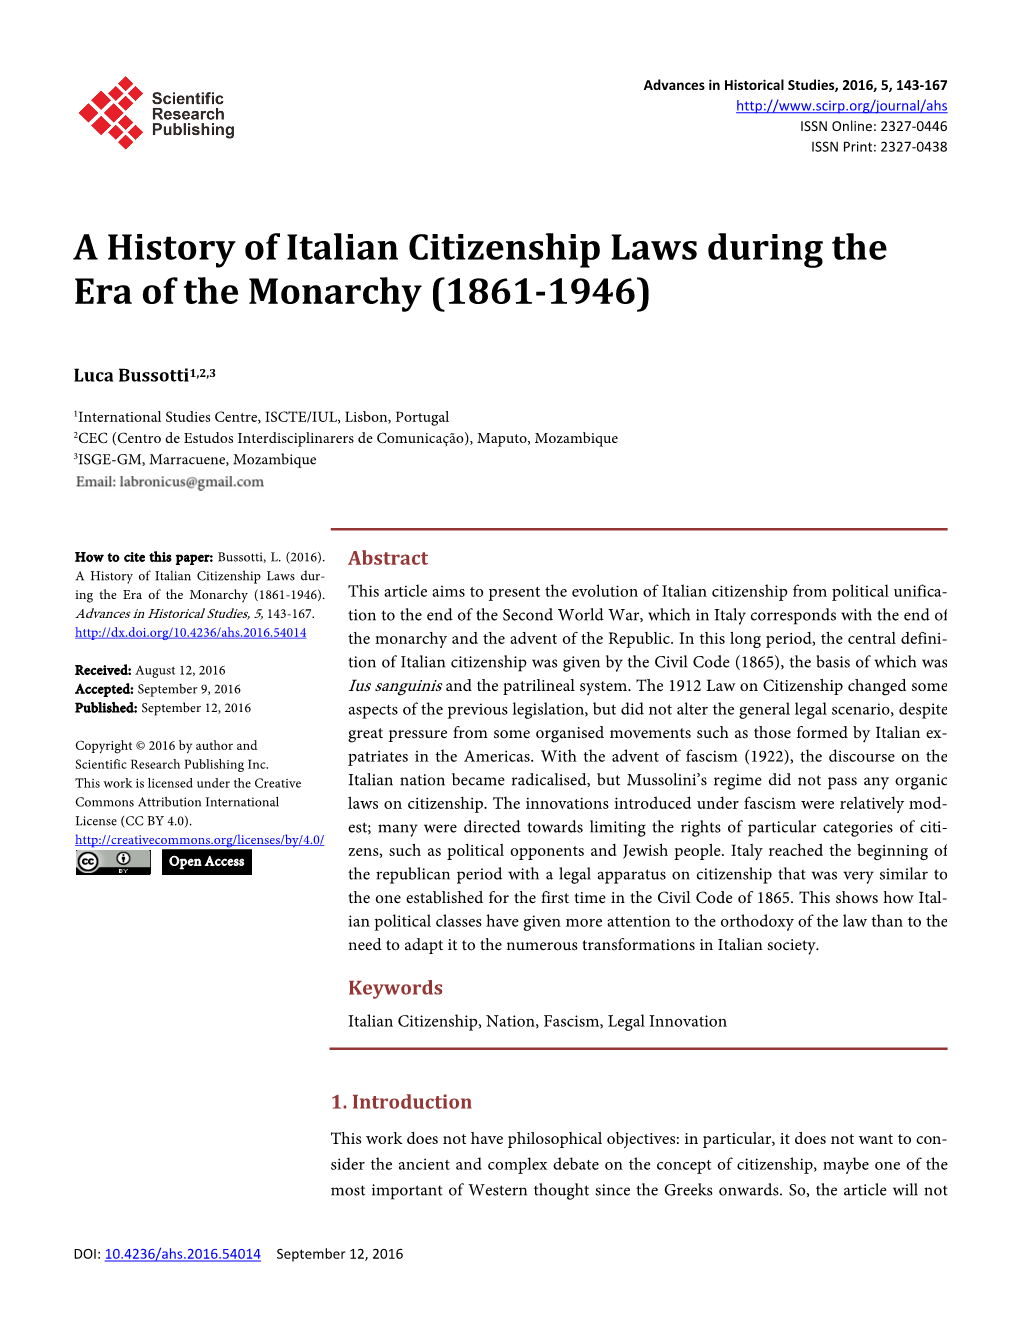 A History of Italian Citizenship Laws During the Era of the Monarchy (1861-1946)